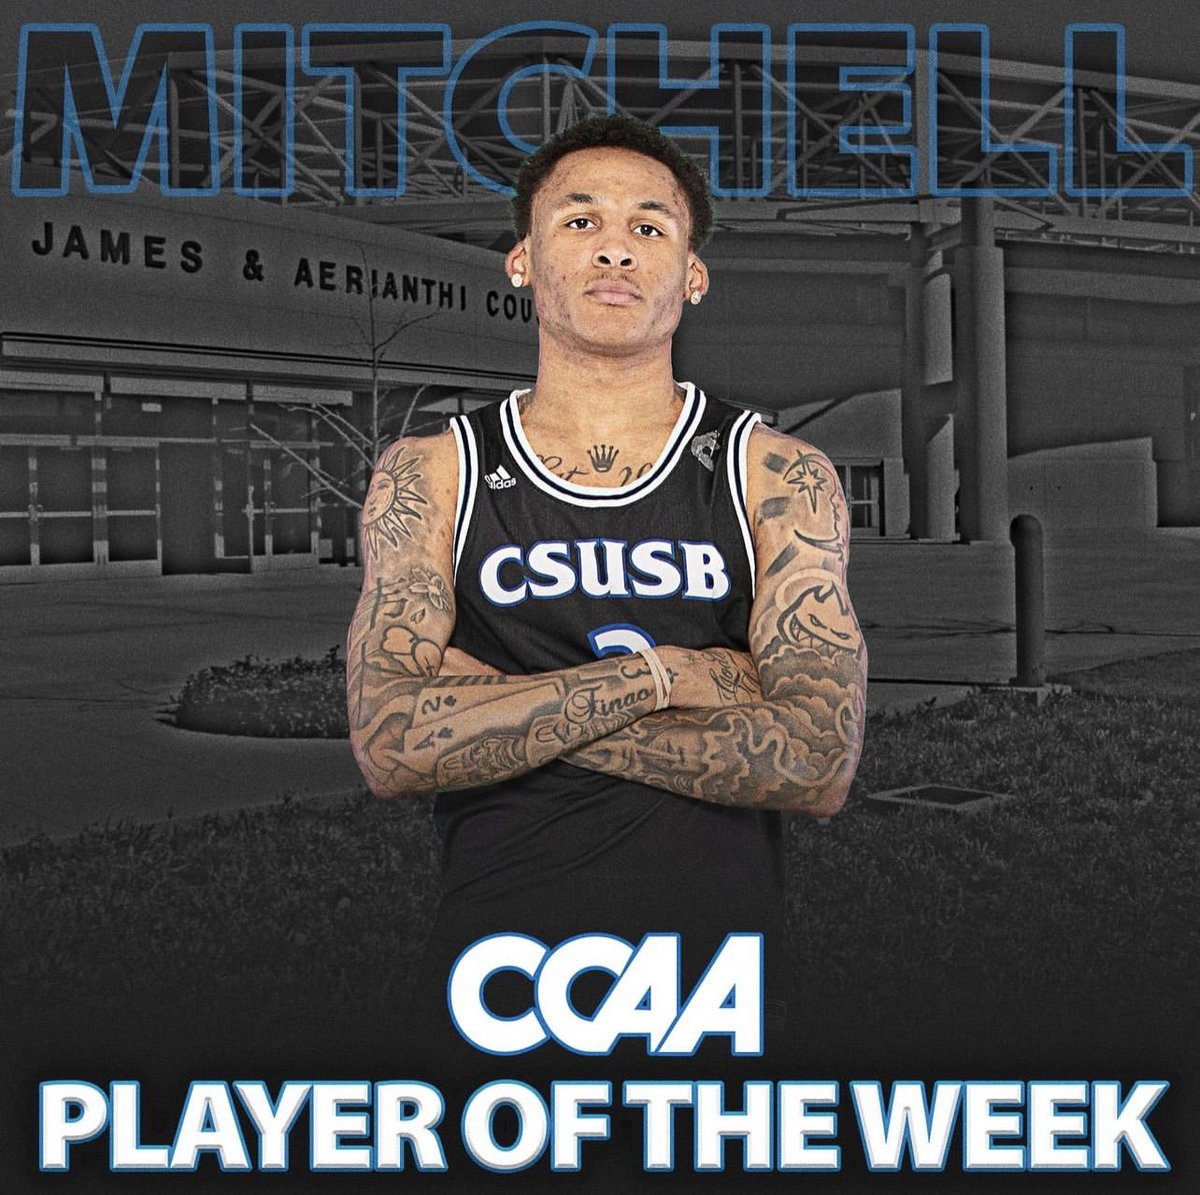 Congrats to our very own Chris Mitchell on earning this weeks CCAA Player of the Week! Averaged 20.5 pts, 9.5 rebs in helping lead the Yotes to wins over Monterey Bay and Stanislaus St. Recording 31 pts, 13 rebs vs Stanislaus St. #GOYotes🐺 | #1inArow